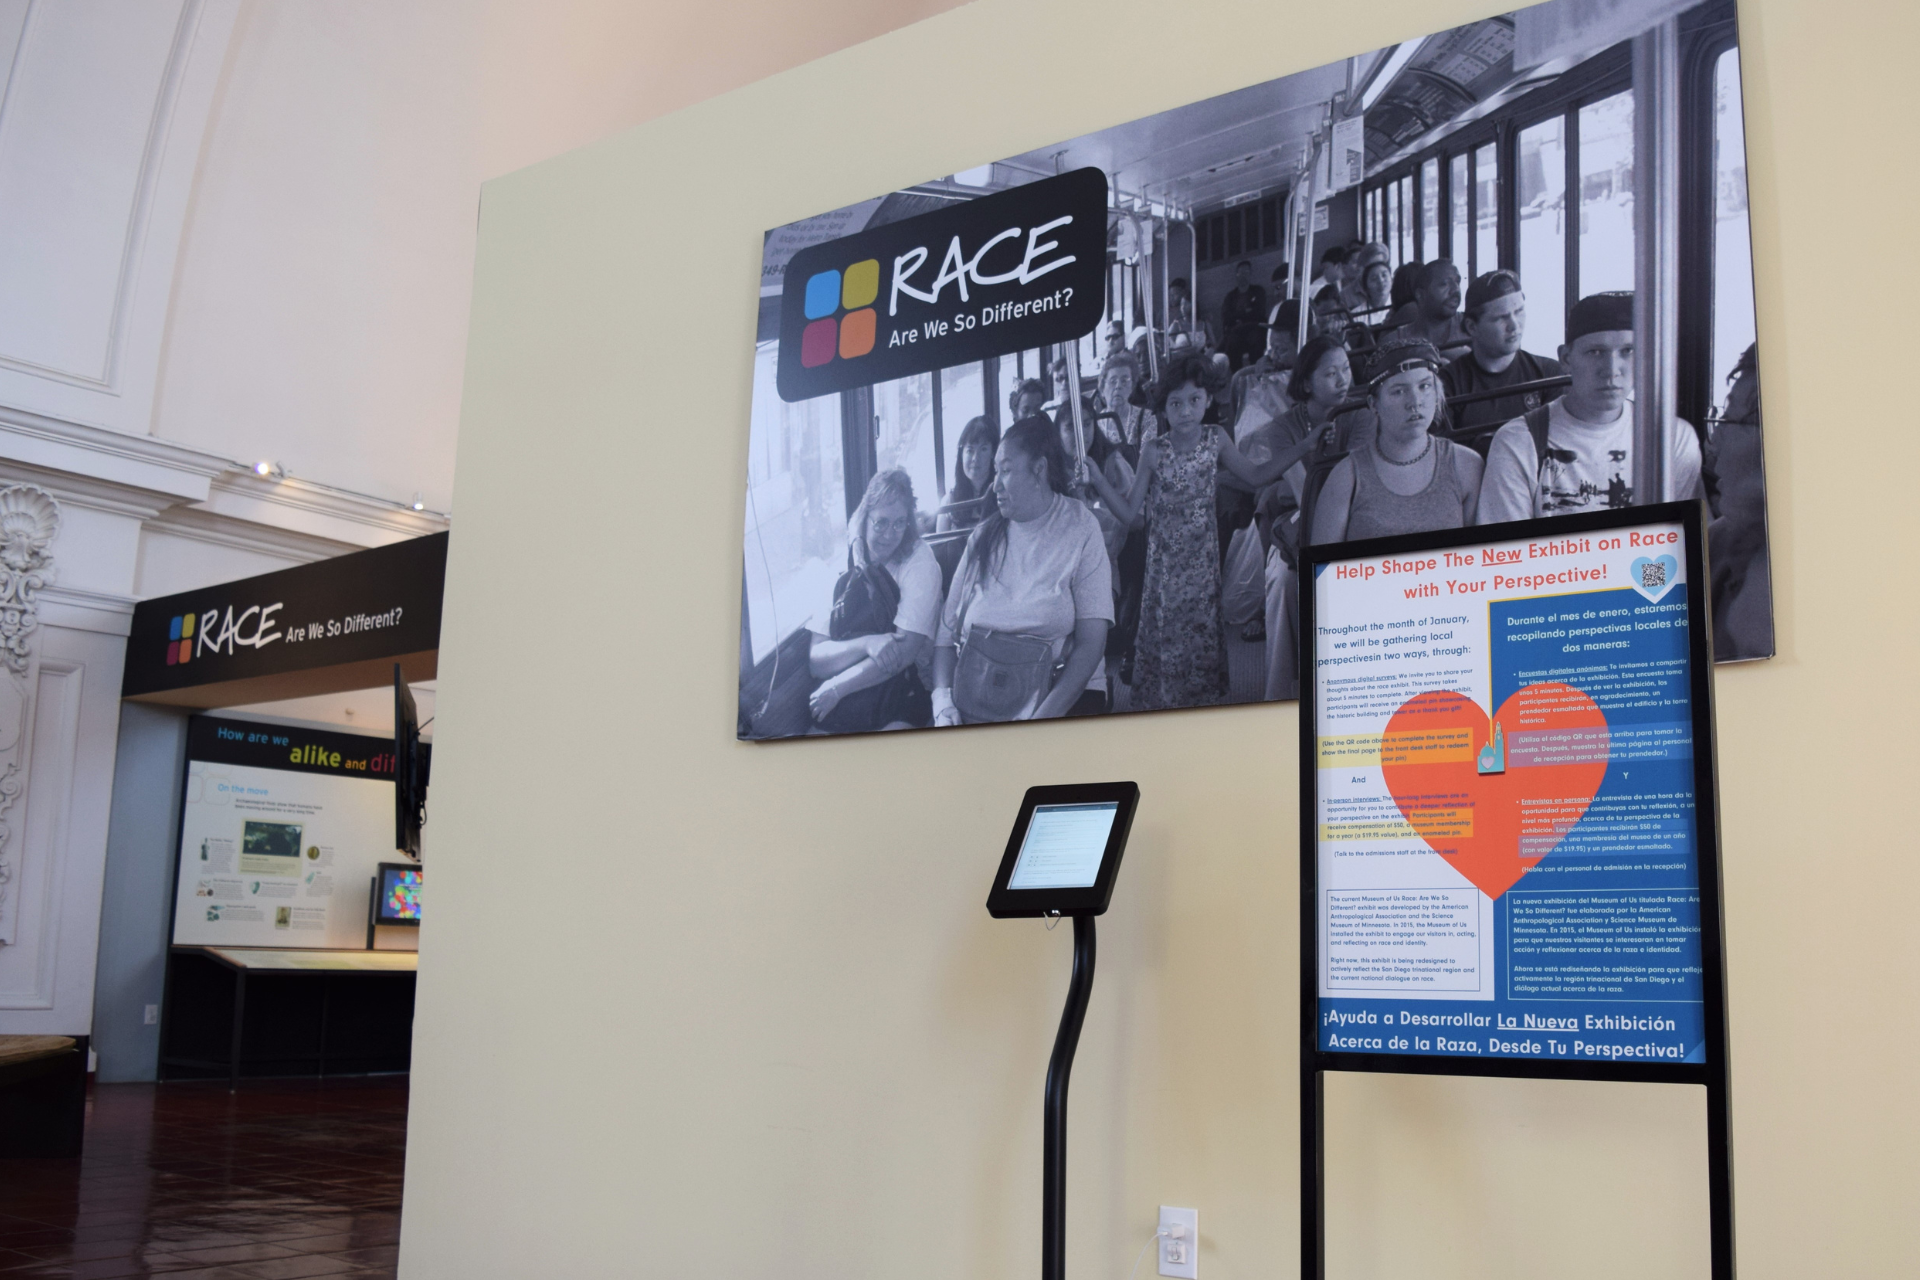 The entry wall of the "Race: Are We So Different?" exhibit, with a large black and white image of several people on a public transit bus centered on the exhibit wall. A large sign next to a small digital kiosk sits right in front of the wall and black and white image. At the top of the large white sign reads, "Help Shape The New Exhibit on Race with Your Perspective!" above two columns of text explaining the exhibit surveys in both English and Spanish.